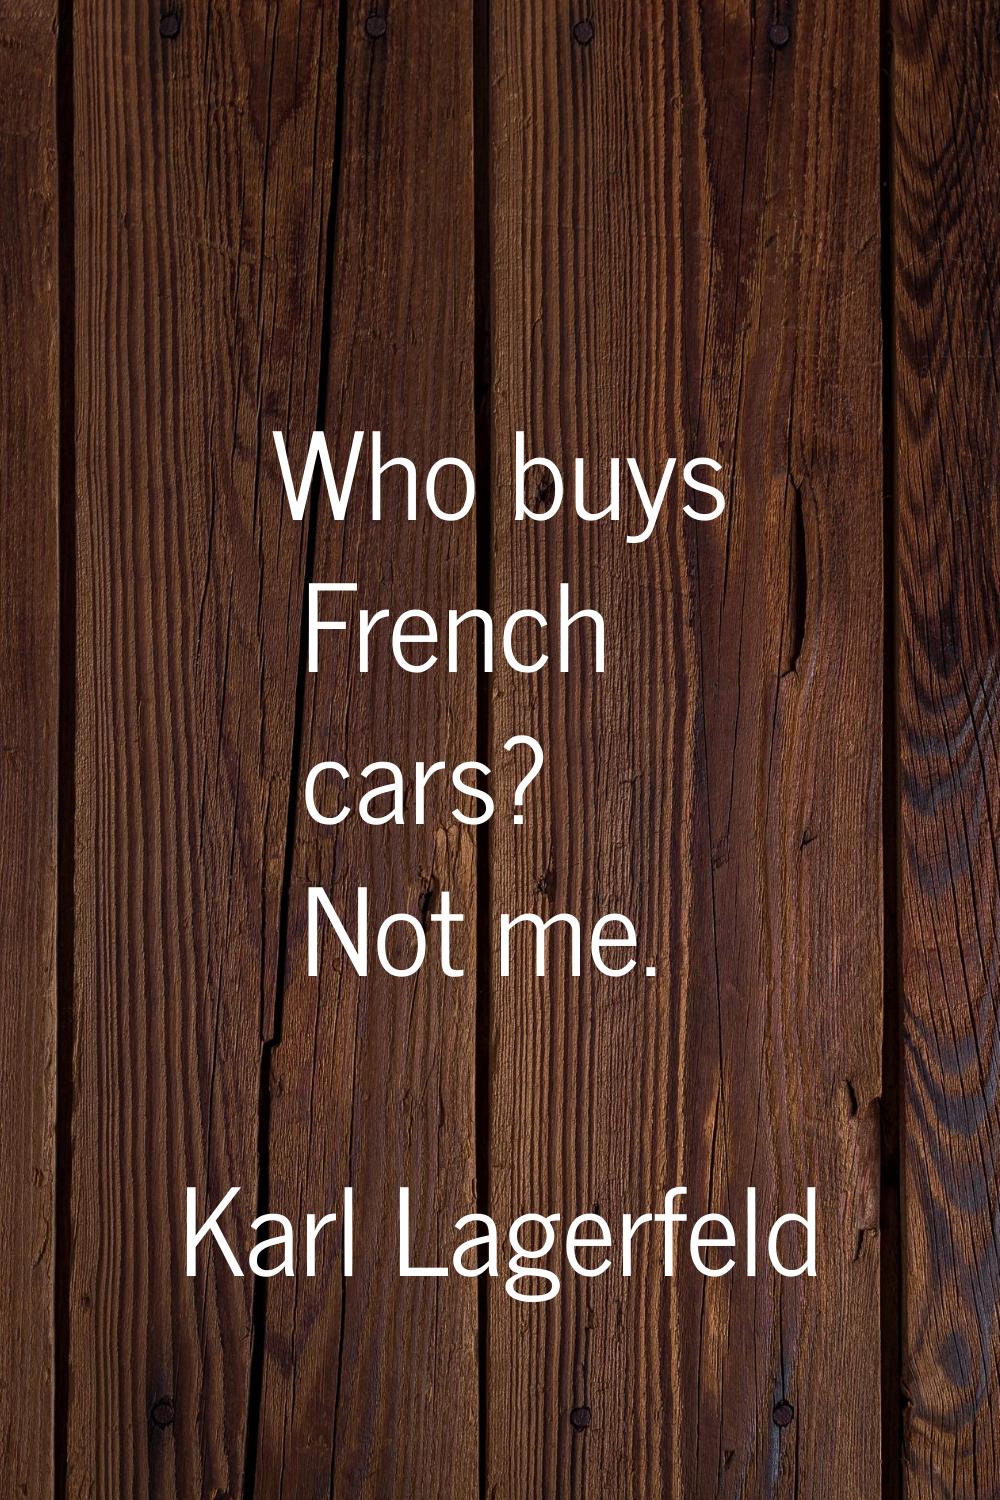 Who buys French cars? Not me.